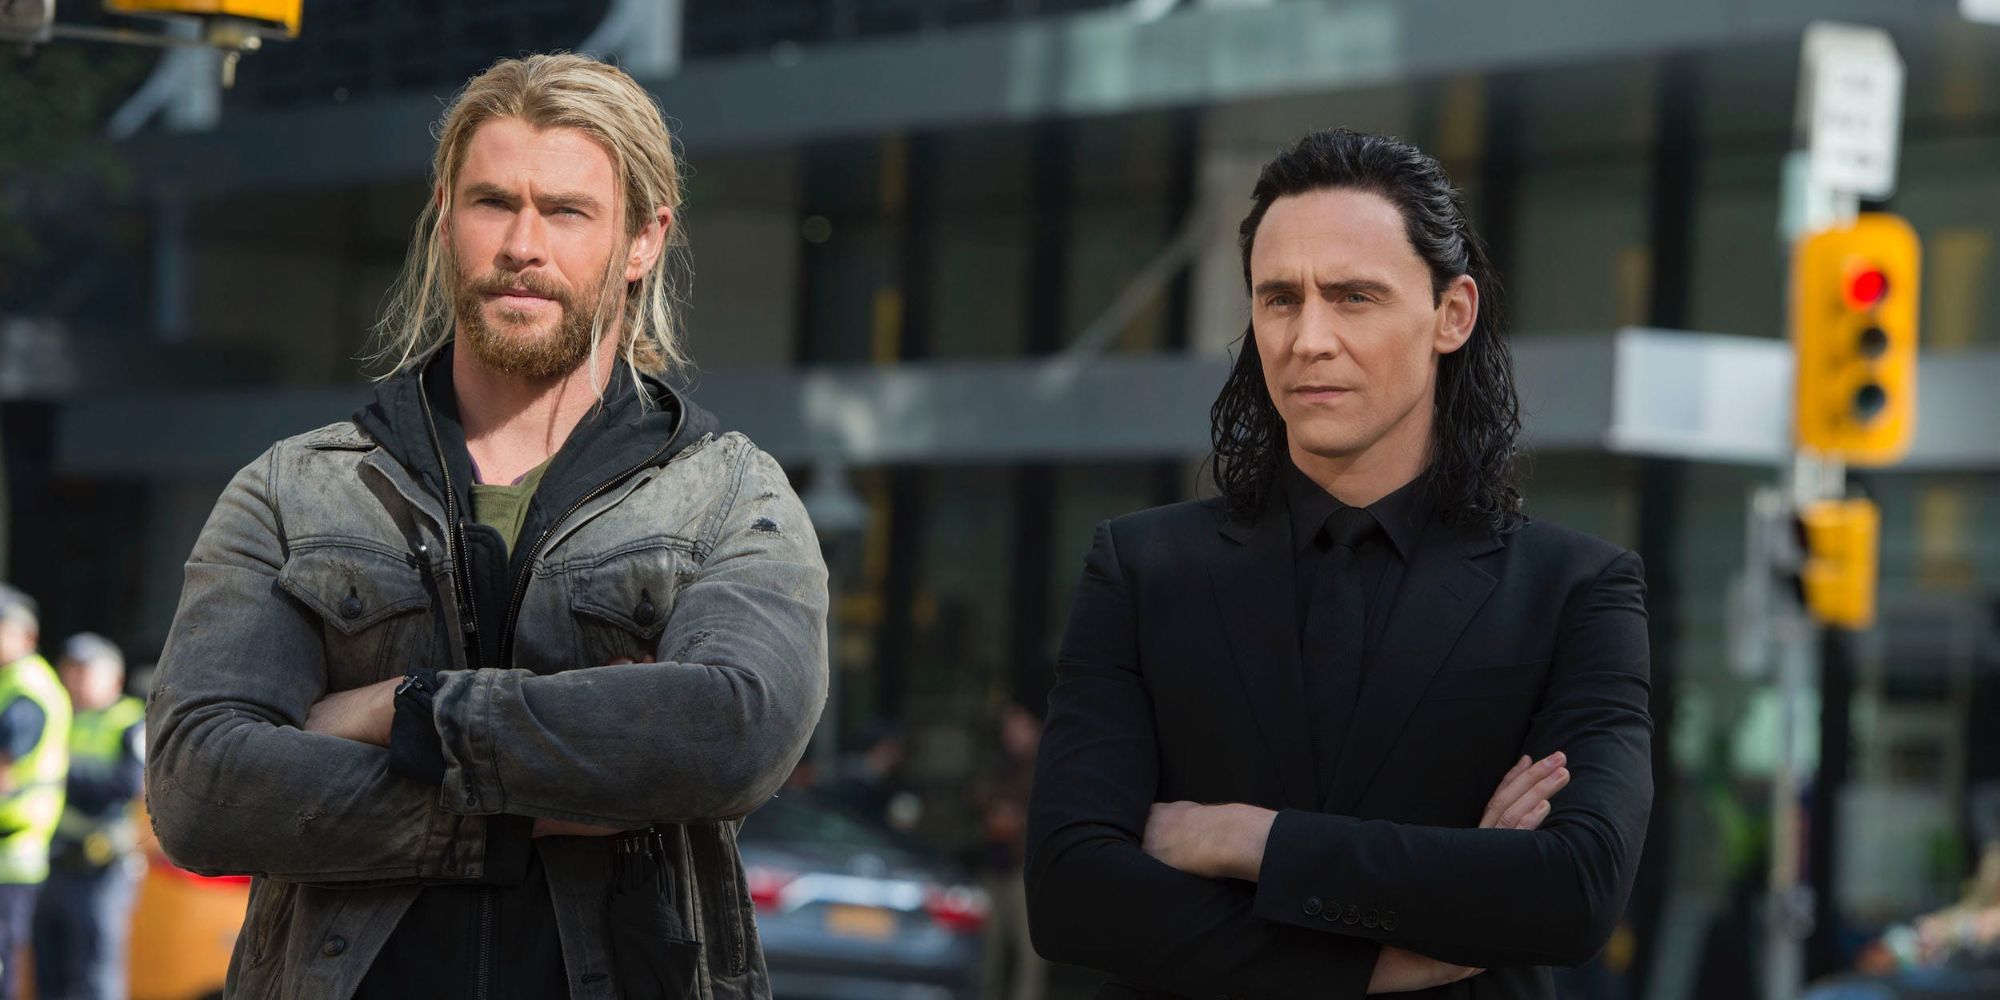 Chris Hemsworth and Tom Hiddleston as Thor and Loki looking ahead with their arms crossed in Thor: Ragnarok